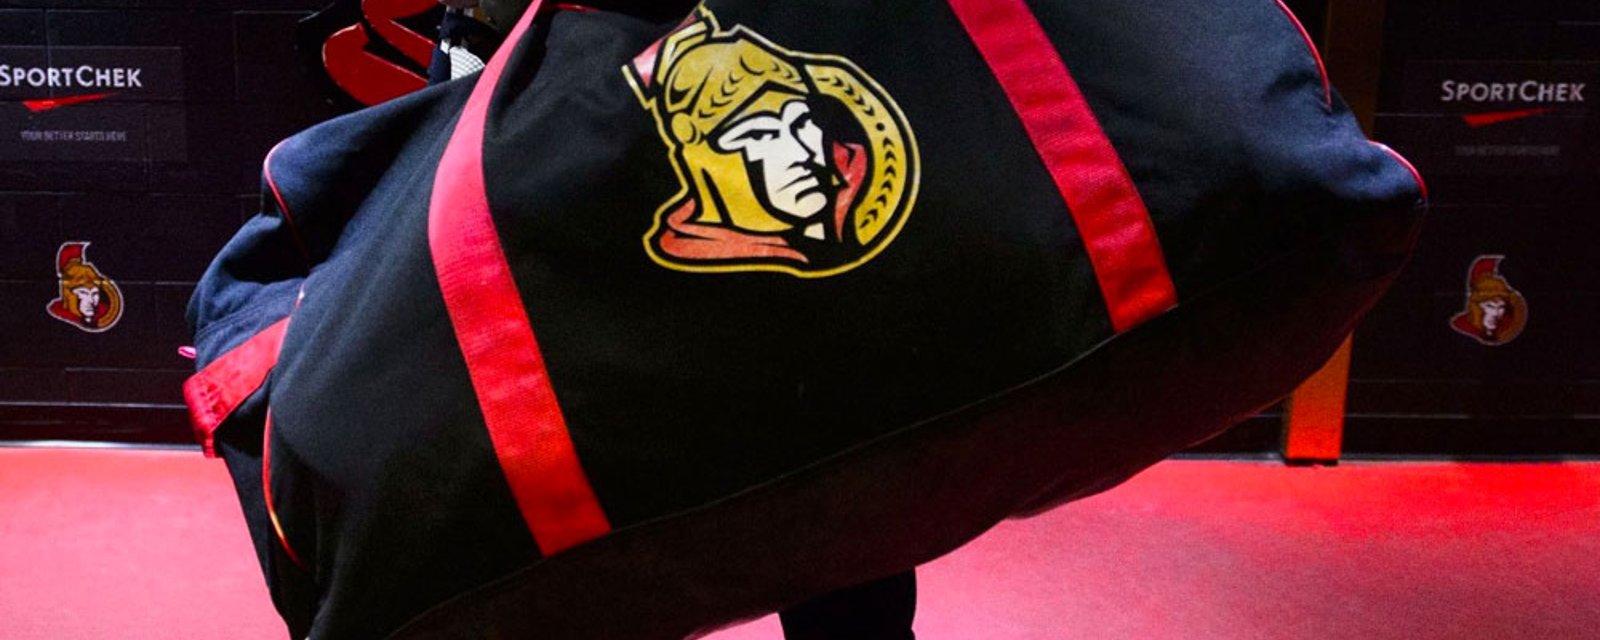 Three more Senators players have tested positive for COVID-19 